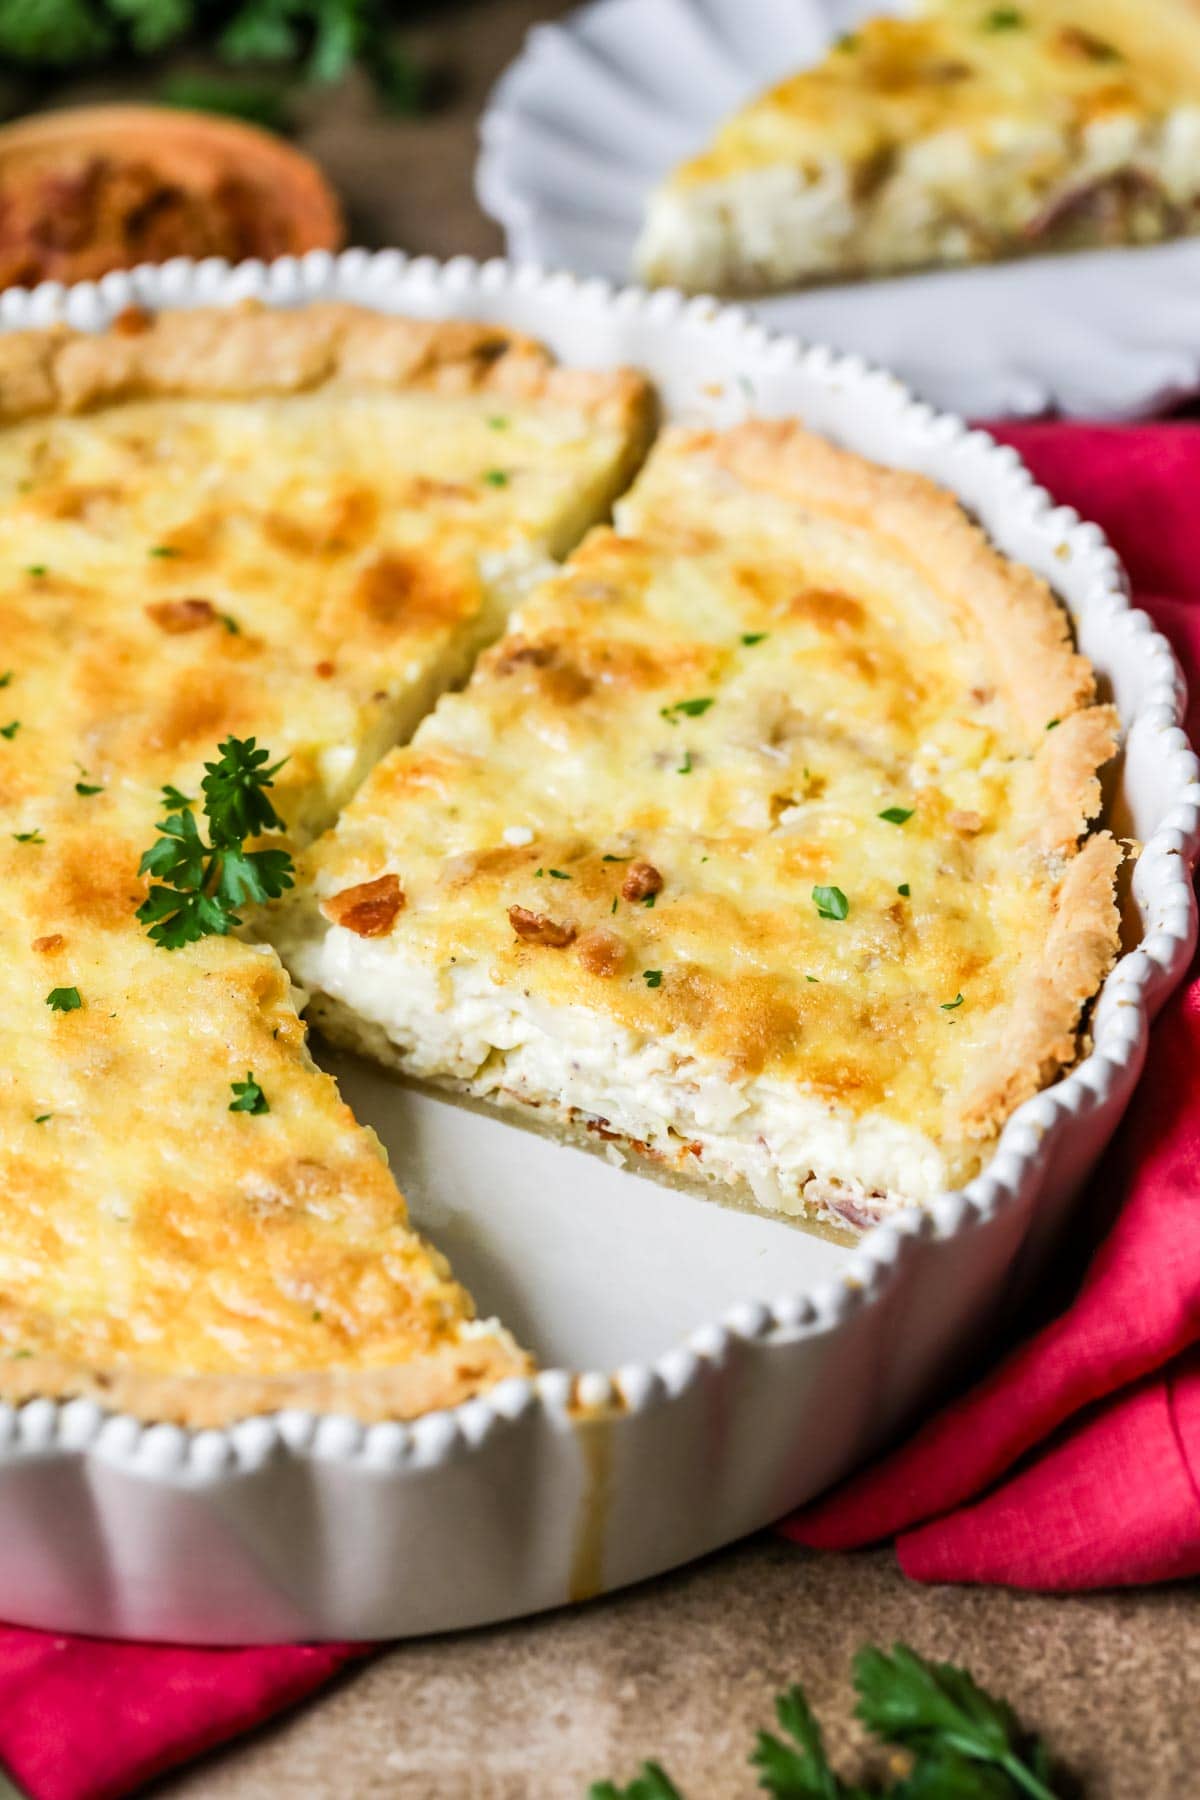 Quiche lorraine in a pan with several slices cut into it.